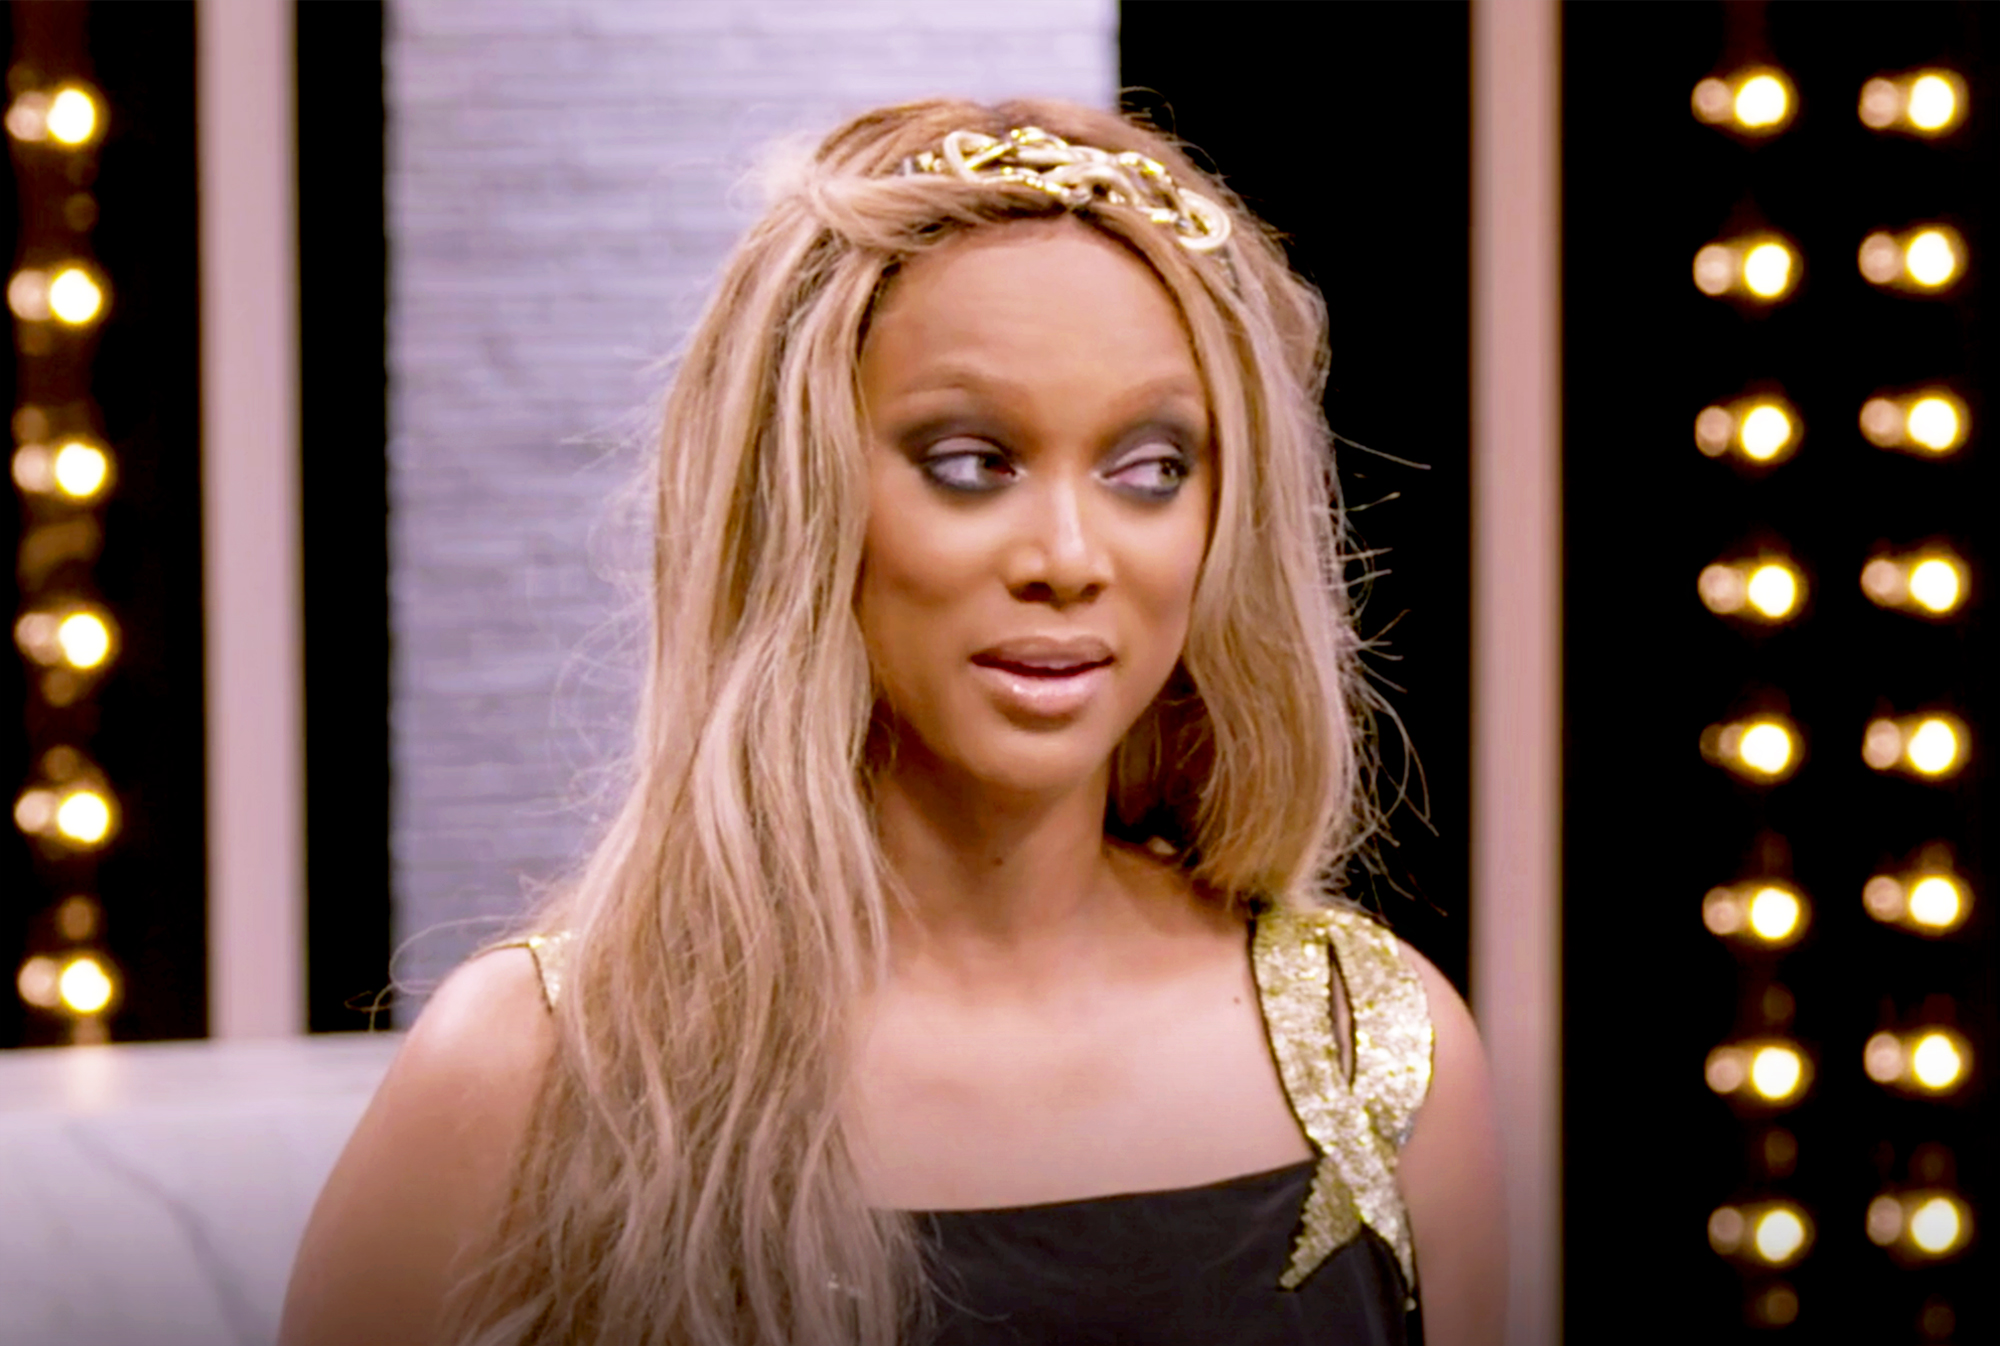 Tyra Banks has a new name to go with her modeling comeback